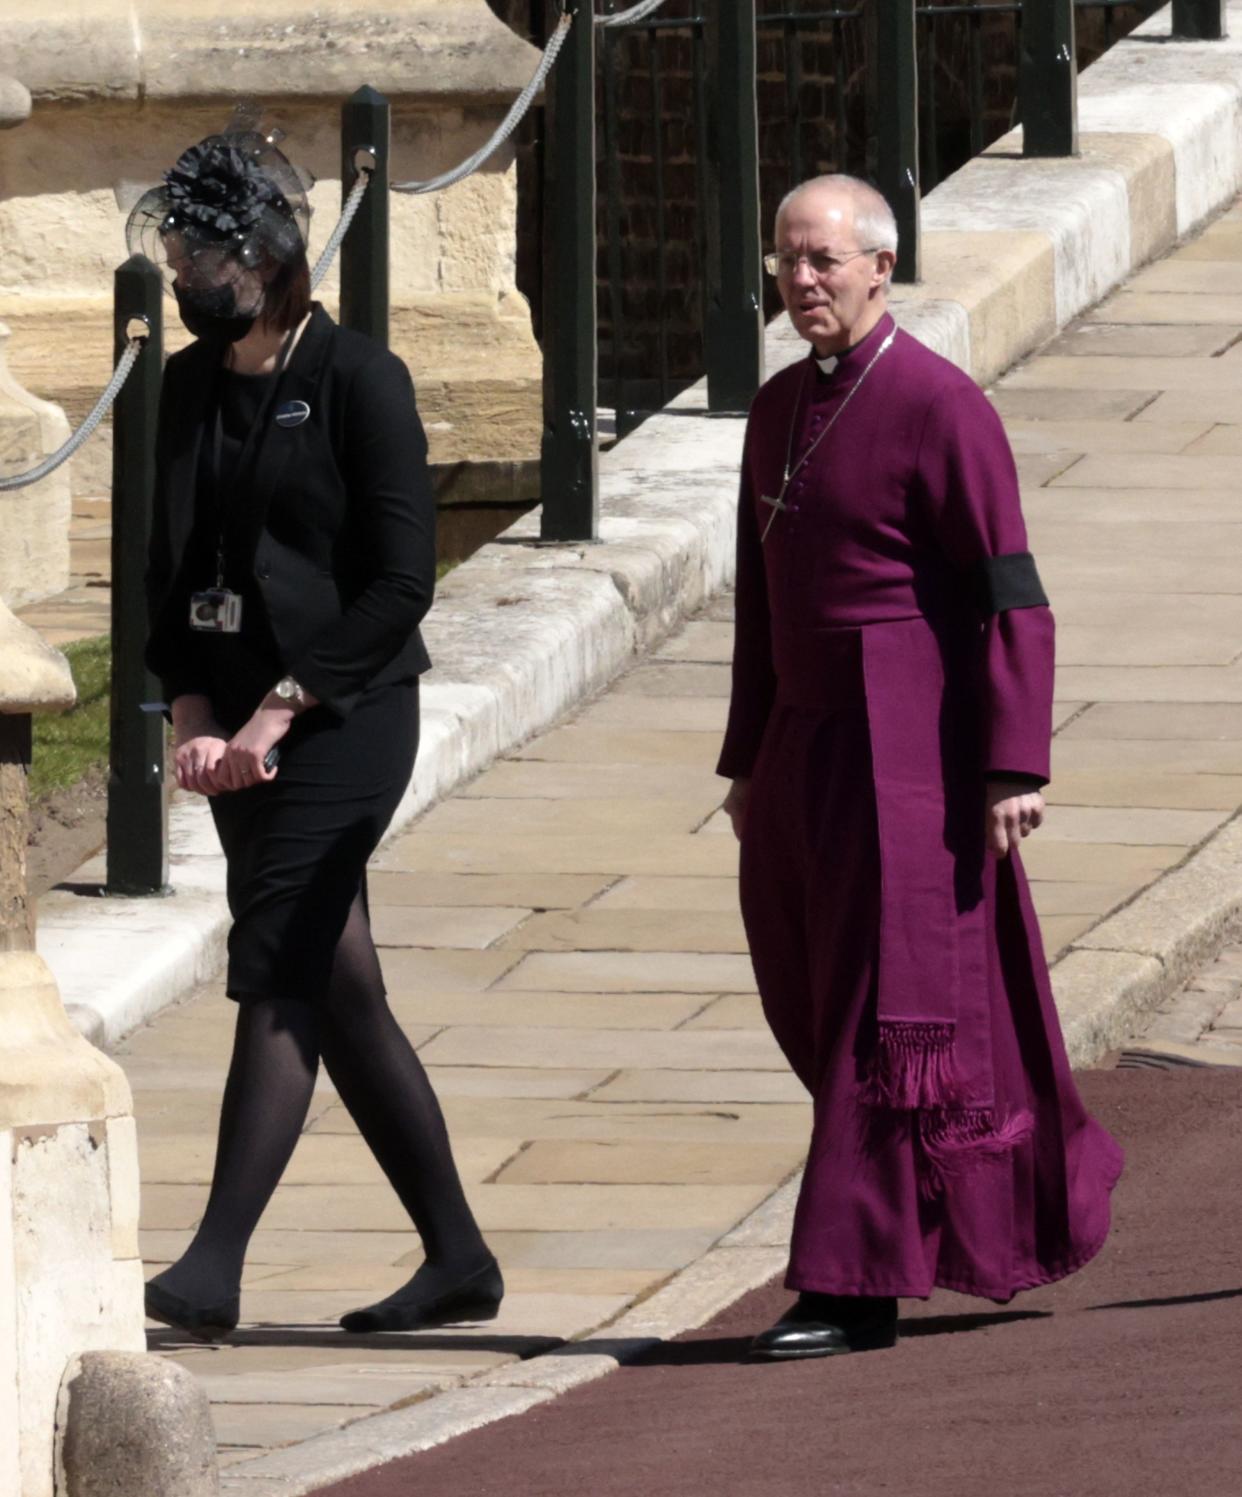 Archbishop of Canterbury Justin Welby, right, arrives at the Windsor Castle ahead of the funeral of Britain's Prince Philip in Windsor, England, Saturday, April 17, 2021.